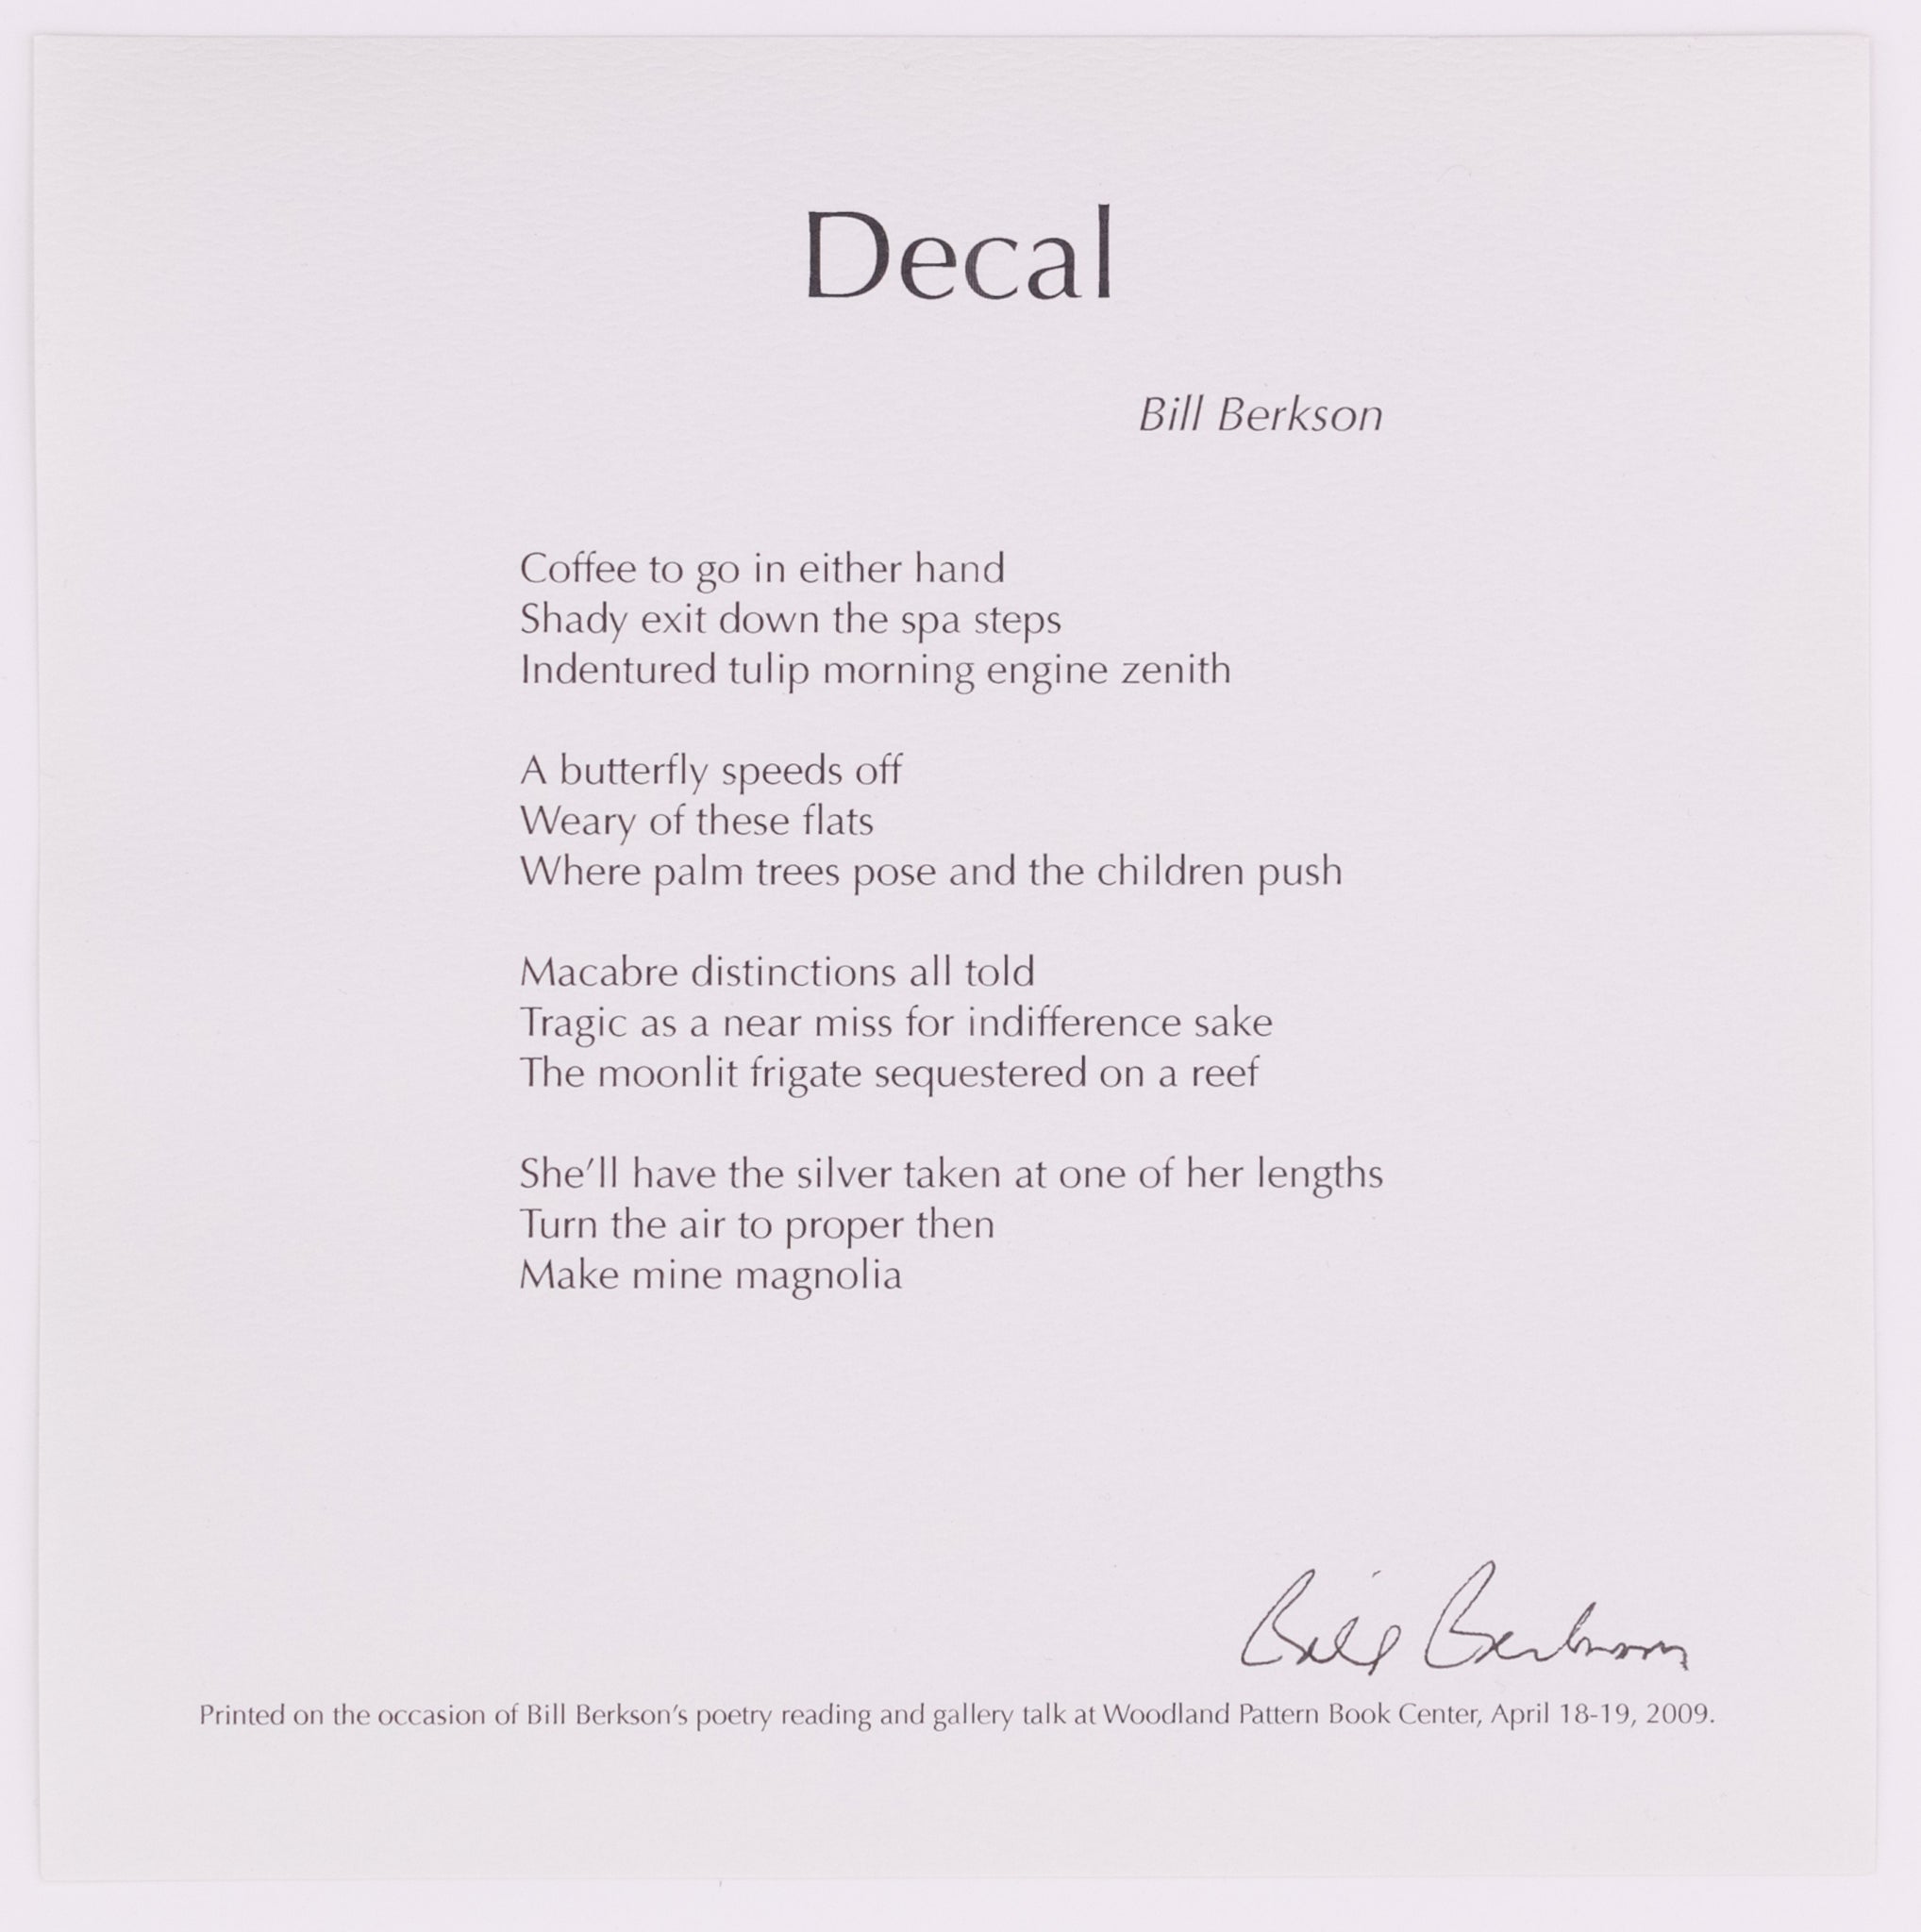 Broadside titled Decal by Bill Berkson. Black text on grey paper.